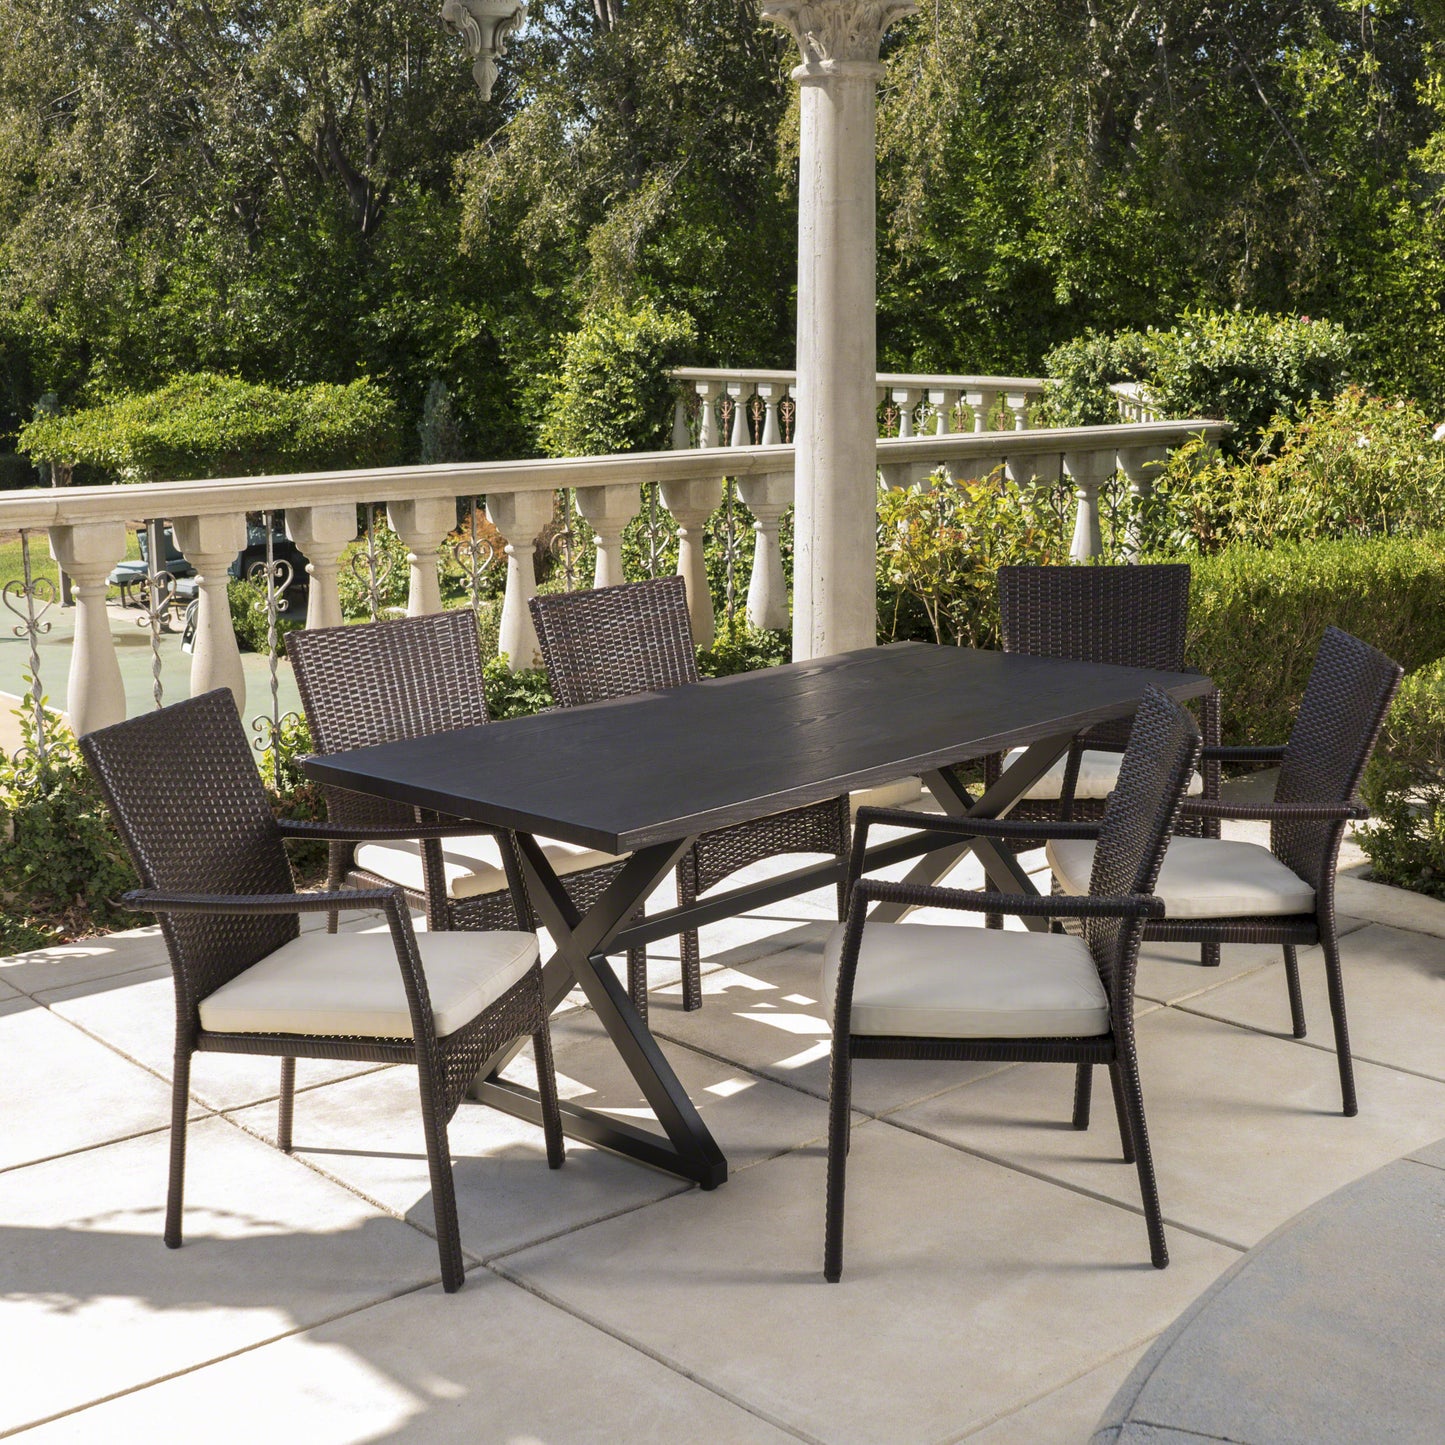 Adelade Outdoor 7 Piece Aluminum Dining Set with Wicker Dining Chairs